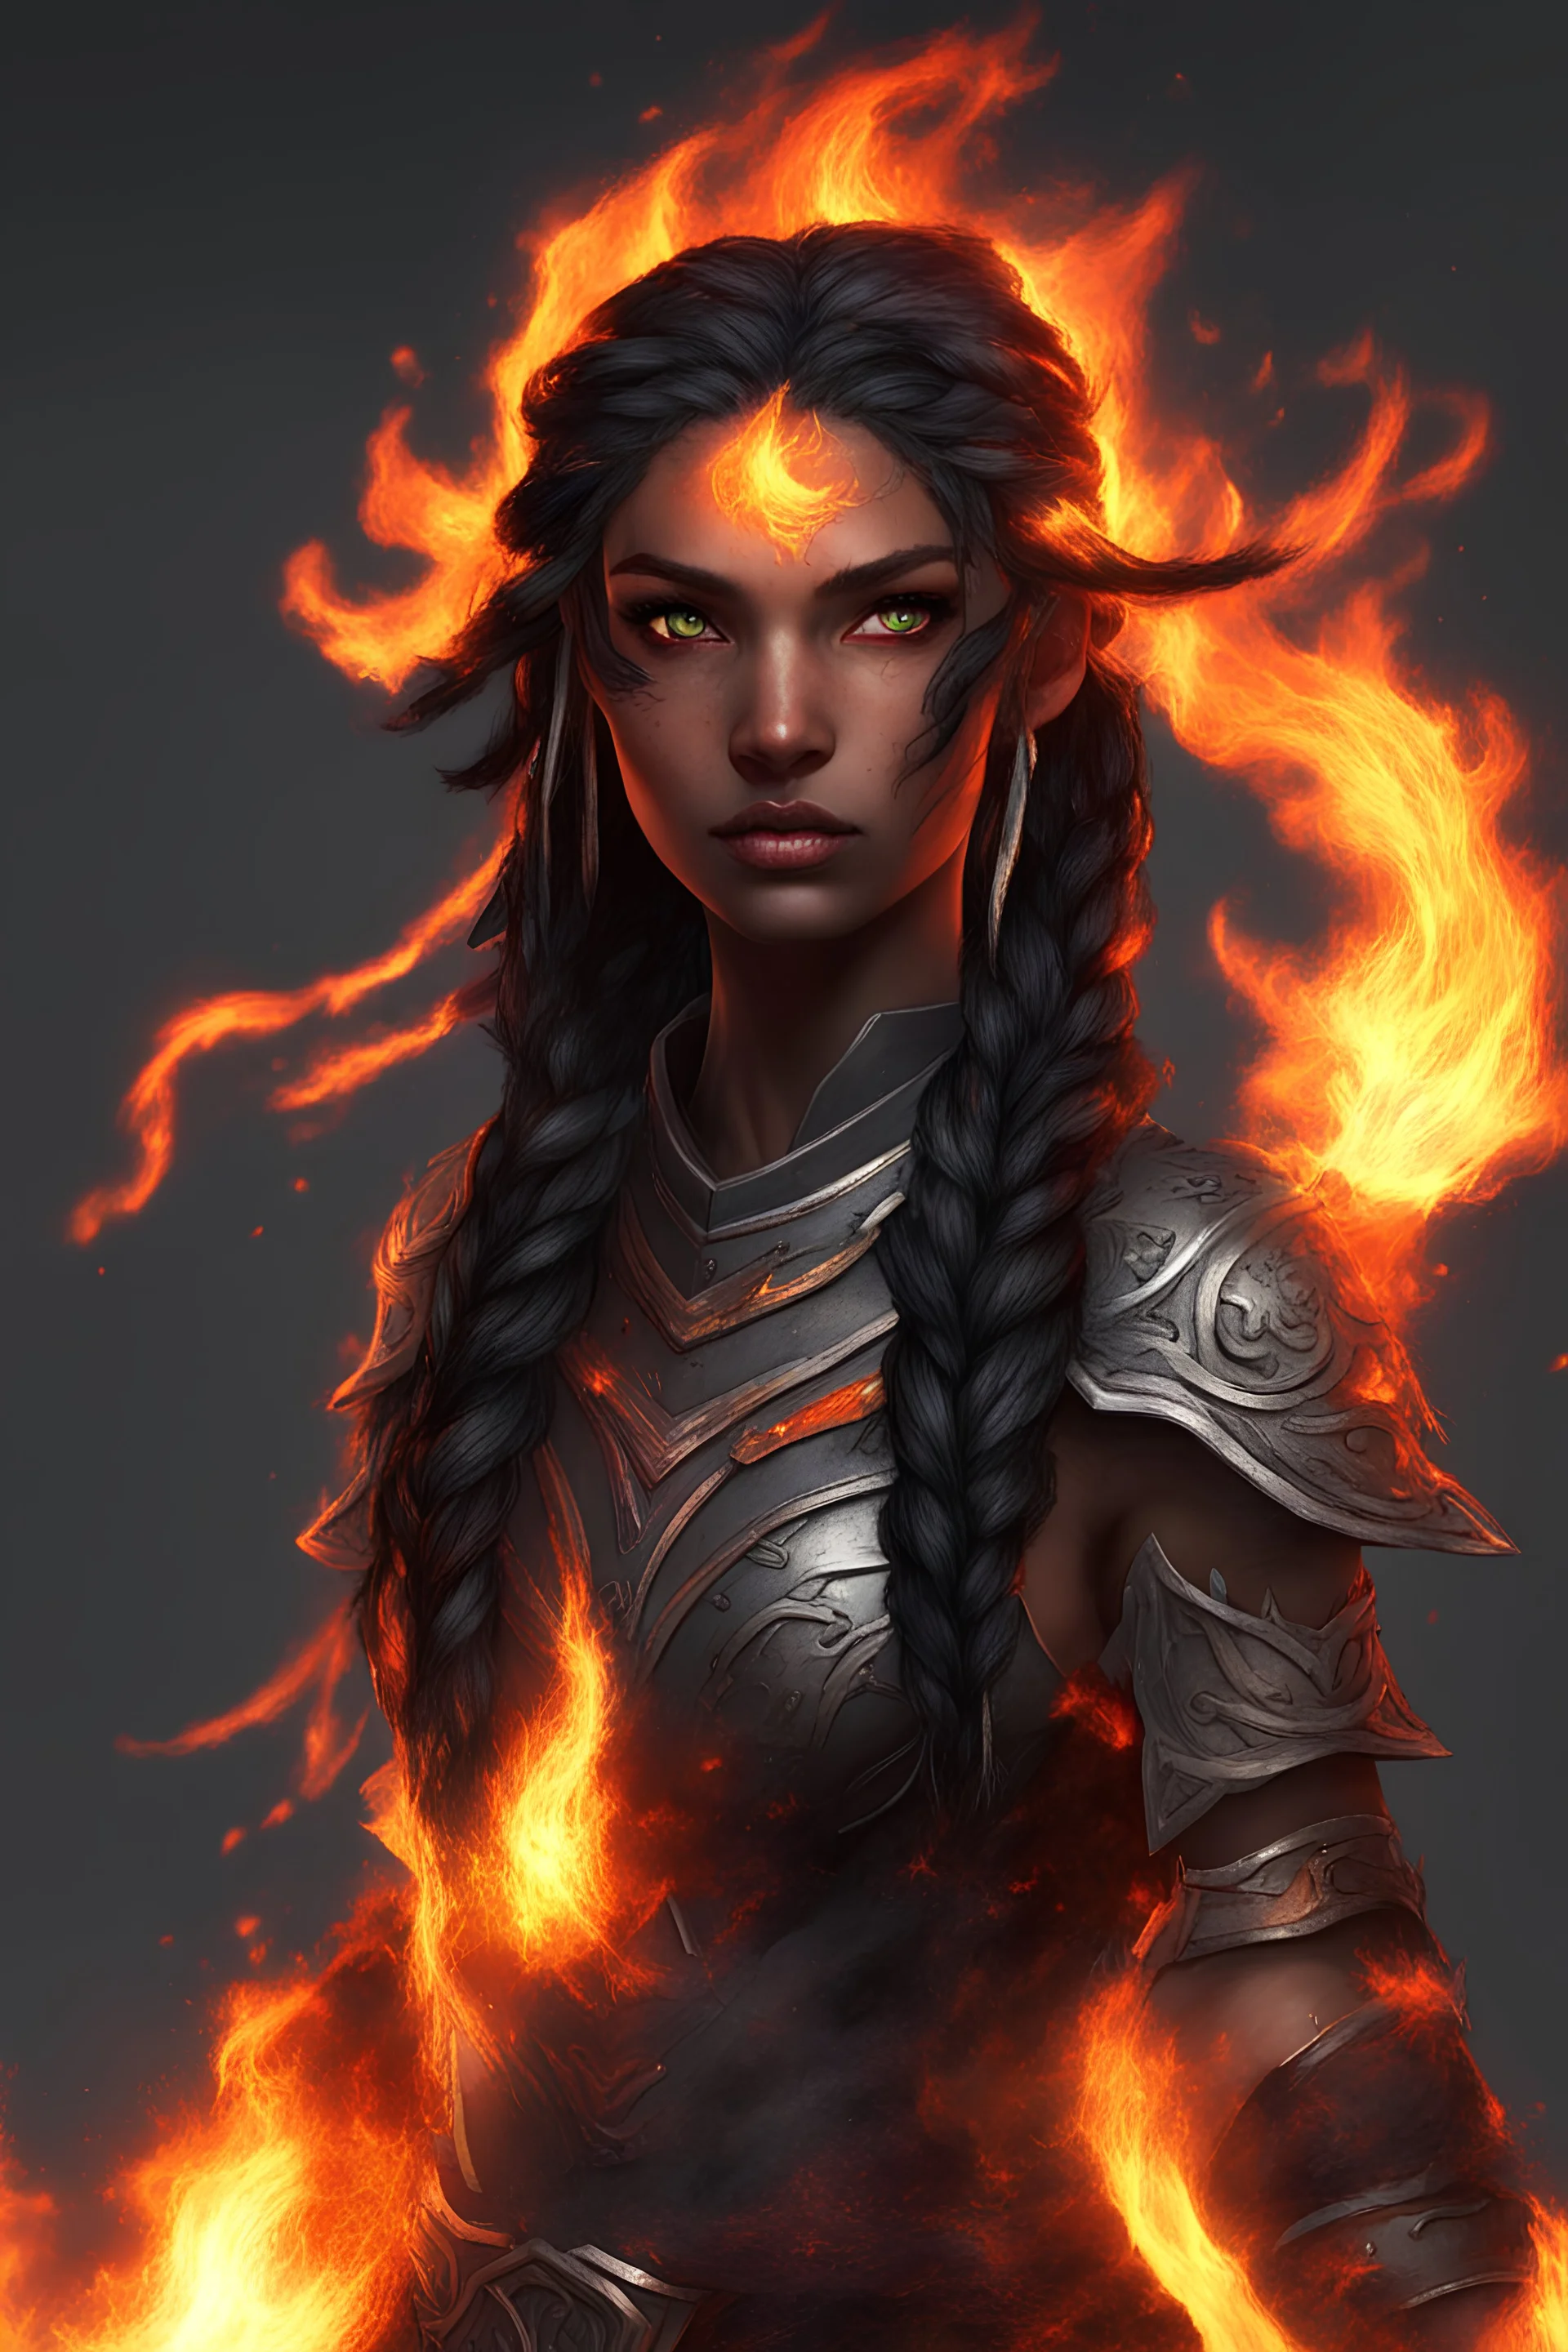 Paladin druid female made from fire . Hair is long and bright black some braids and it is on fire. Make fire with hands . Has a big scar over whole face. Skin color is dark. Eyes are like fire